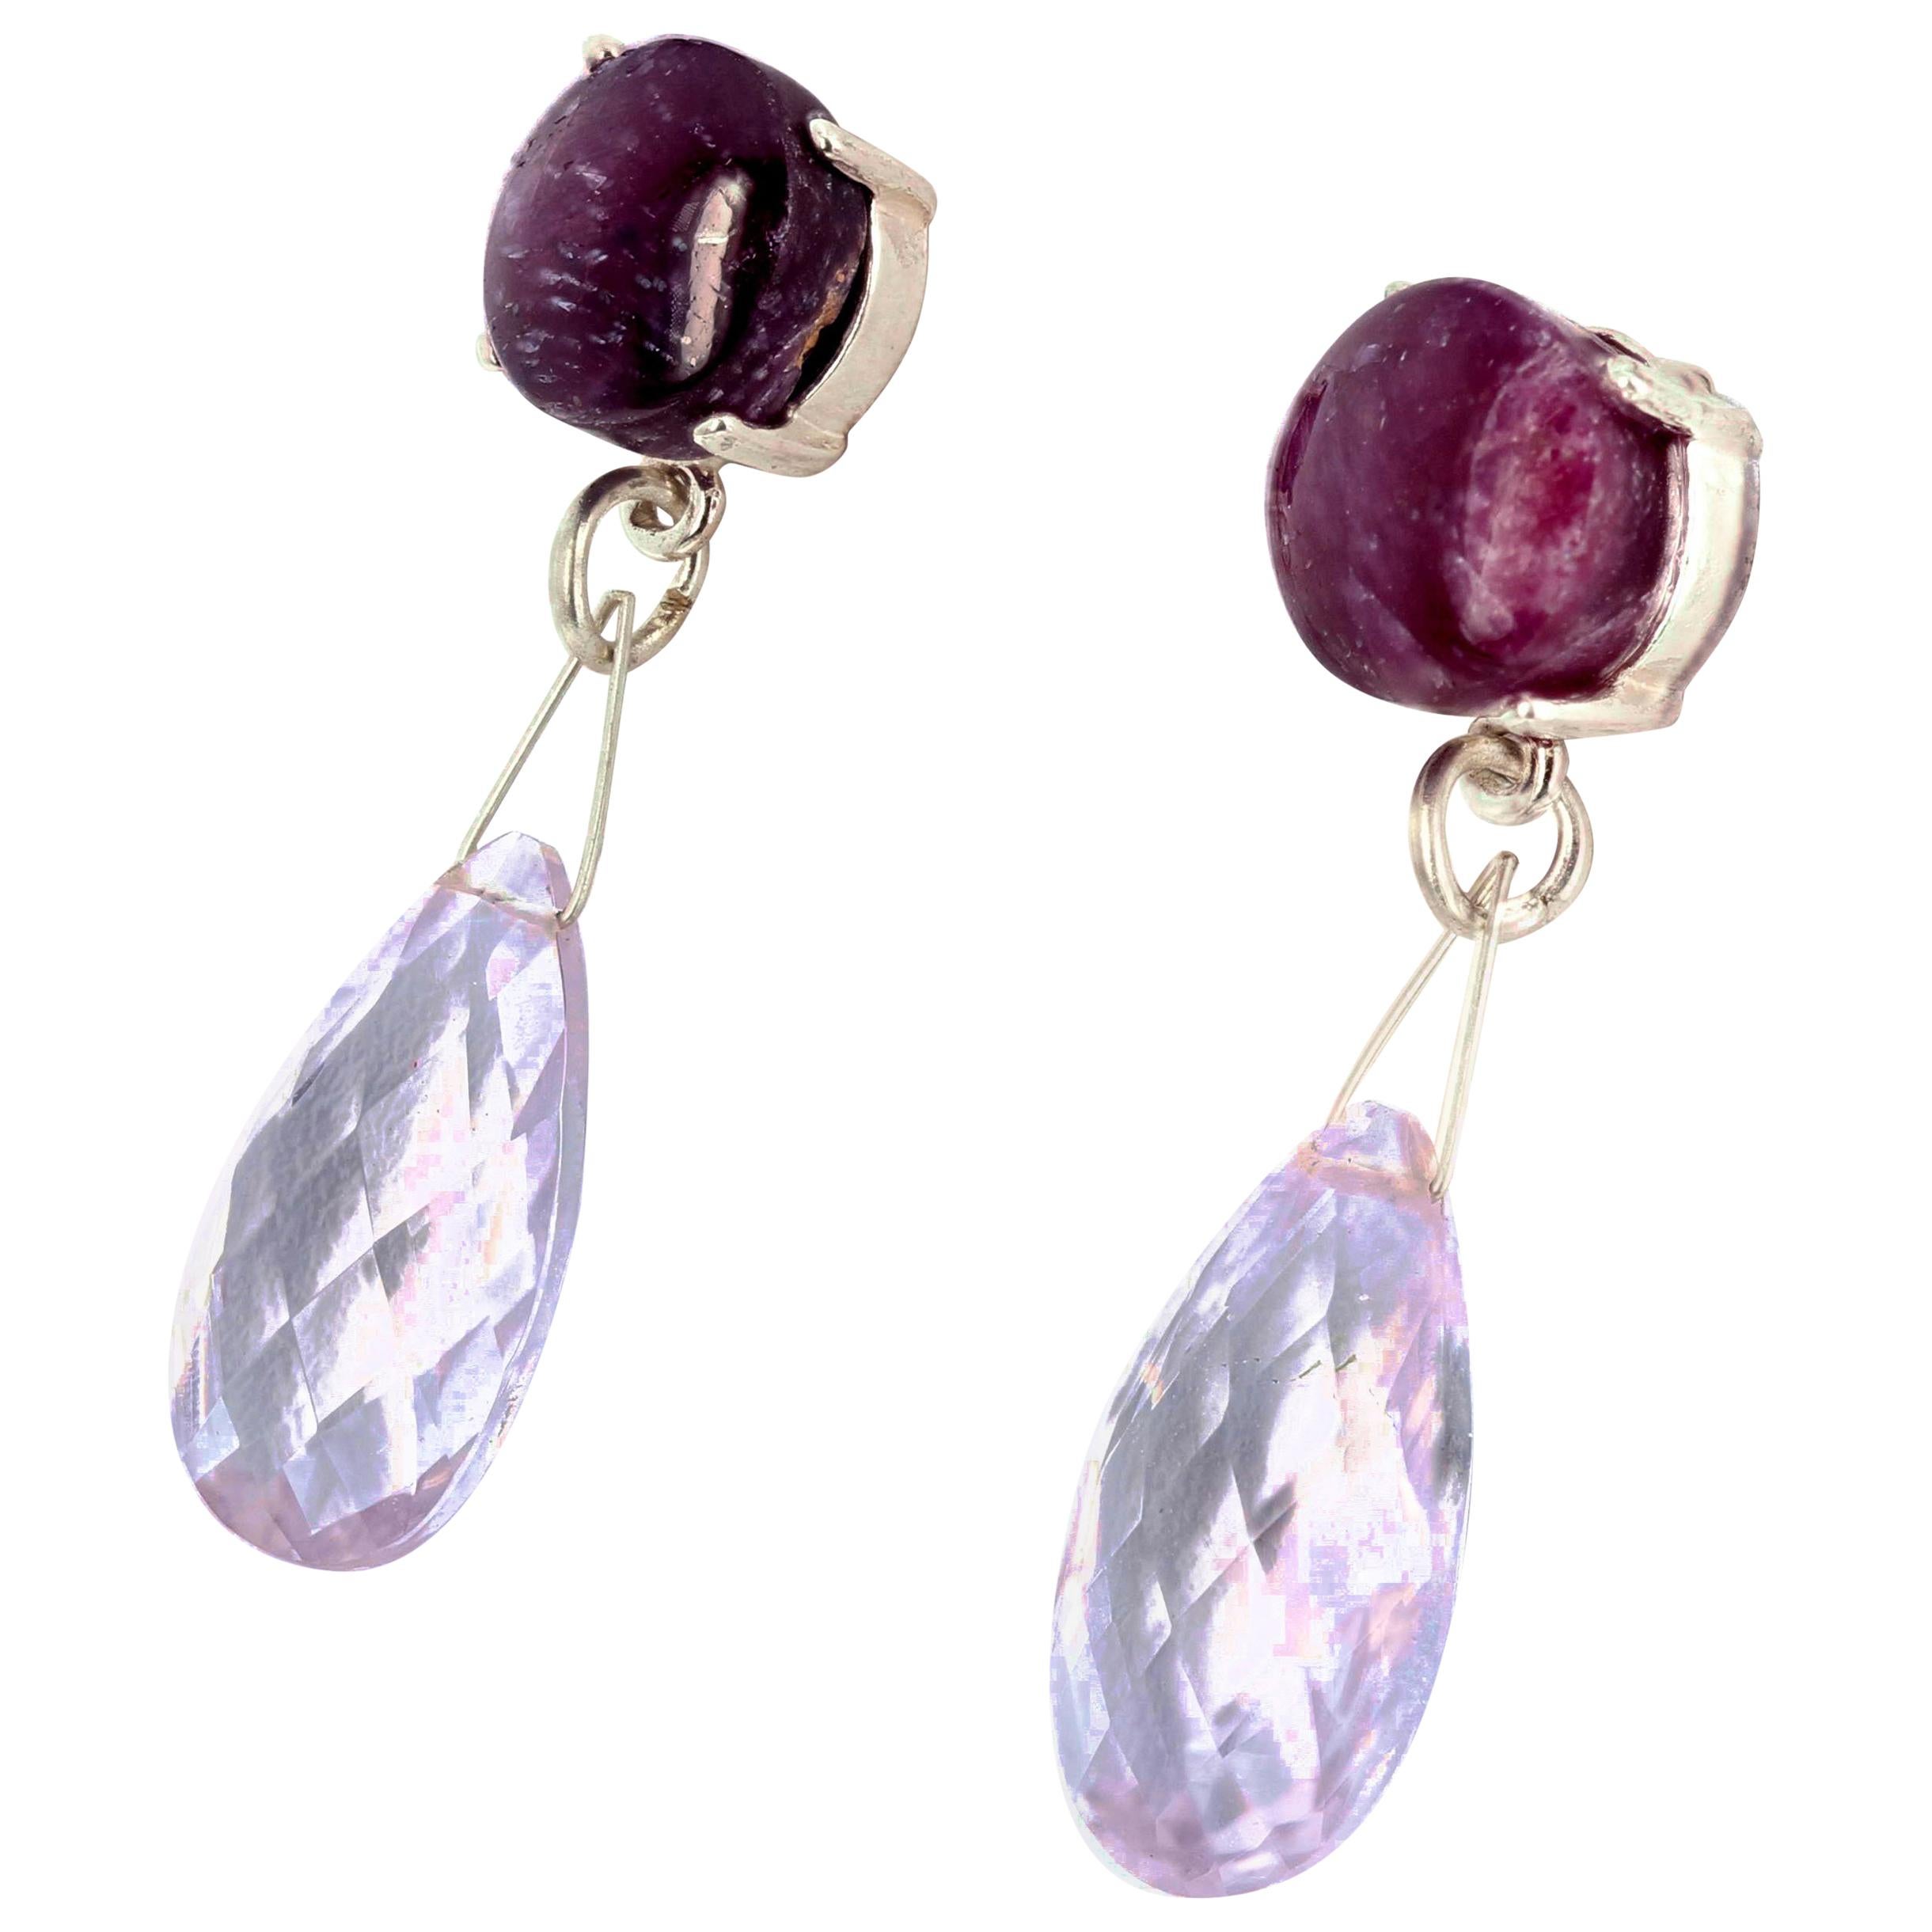 Glowing polished 8.6 carats of round red natural real Ruby rock (8.3 mm) elegantly dangle brilliant checkerboard gem cut 26.9 carats of Rose of France Amethysts sterling silver stud earrings.  They hang approximately 1.26 inches long from top of